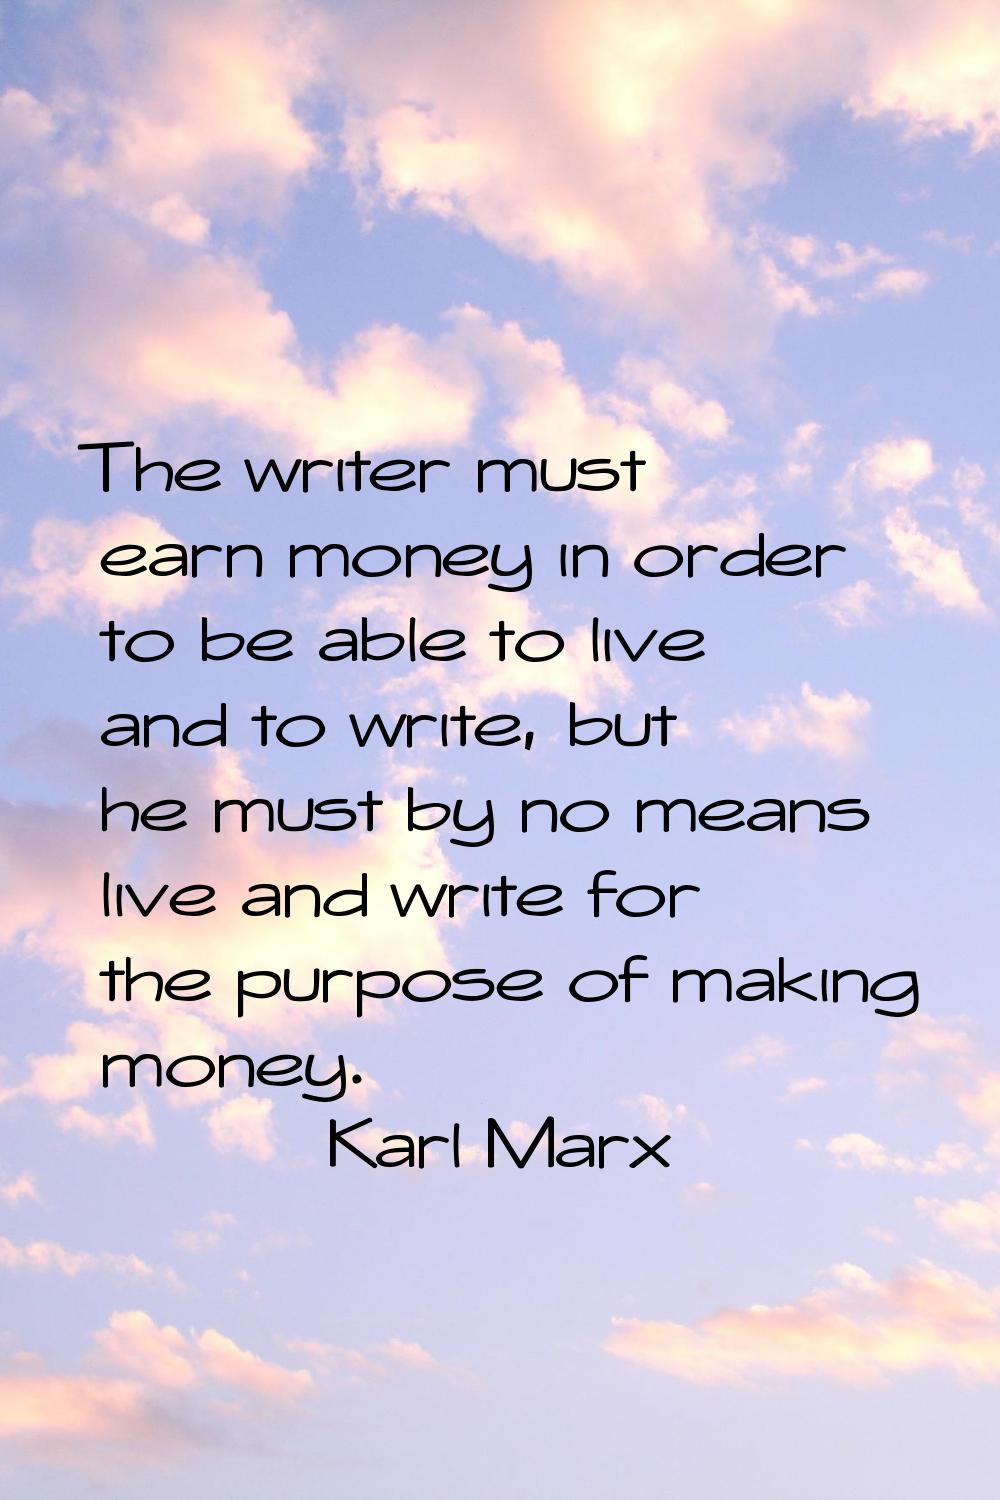 The writer must earn money in order to be able to live and to write, but he must by no means live a